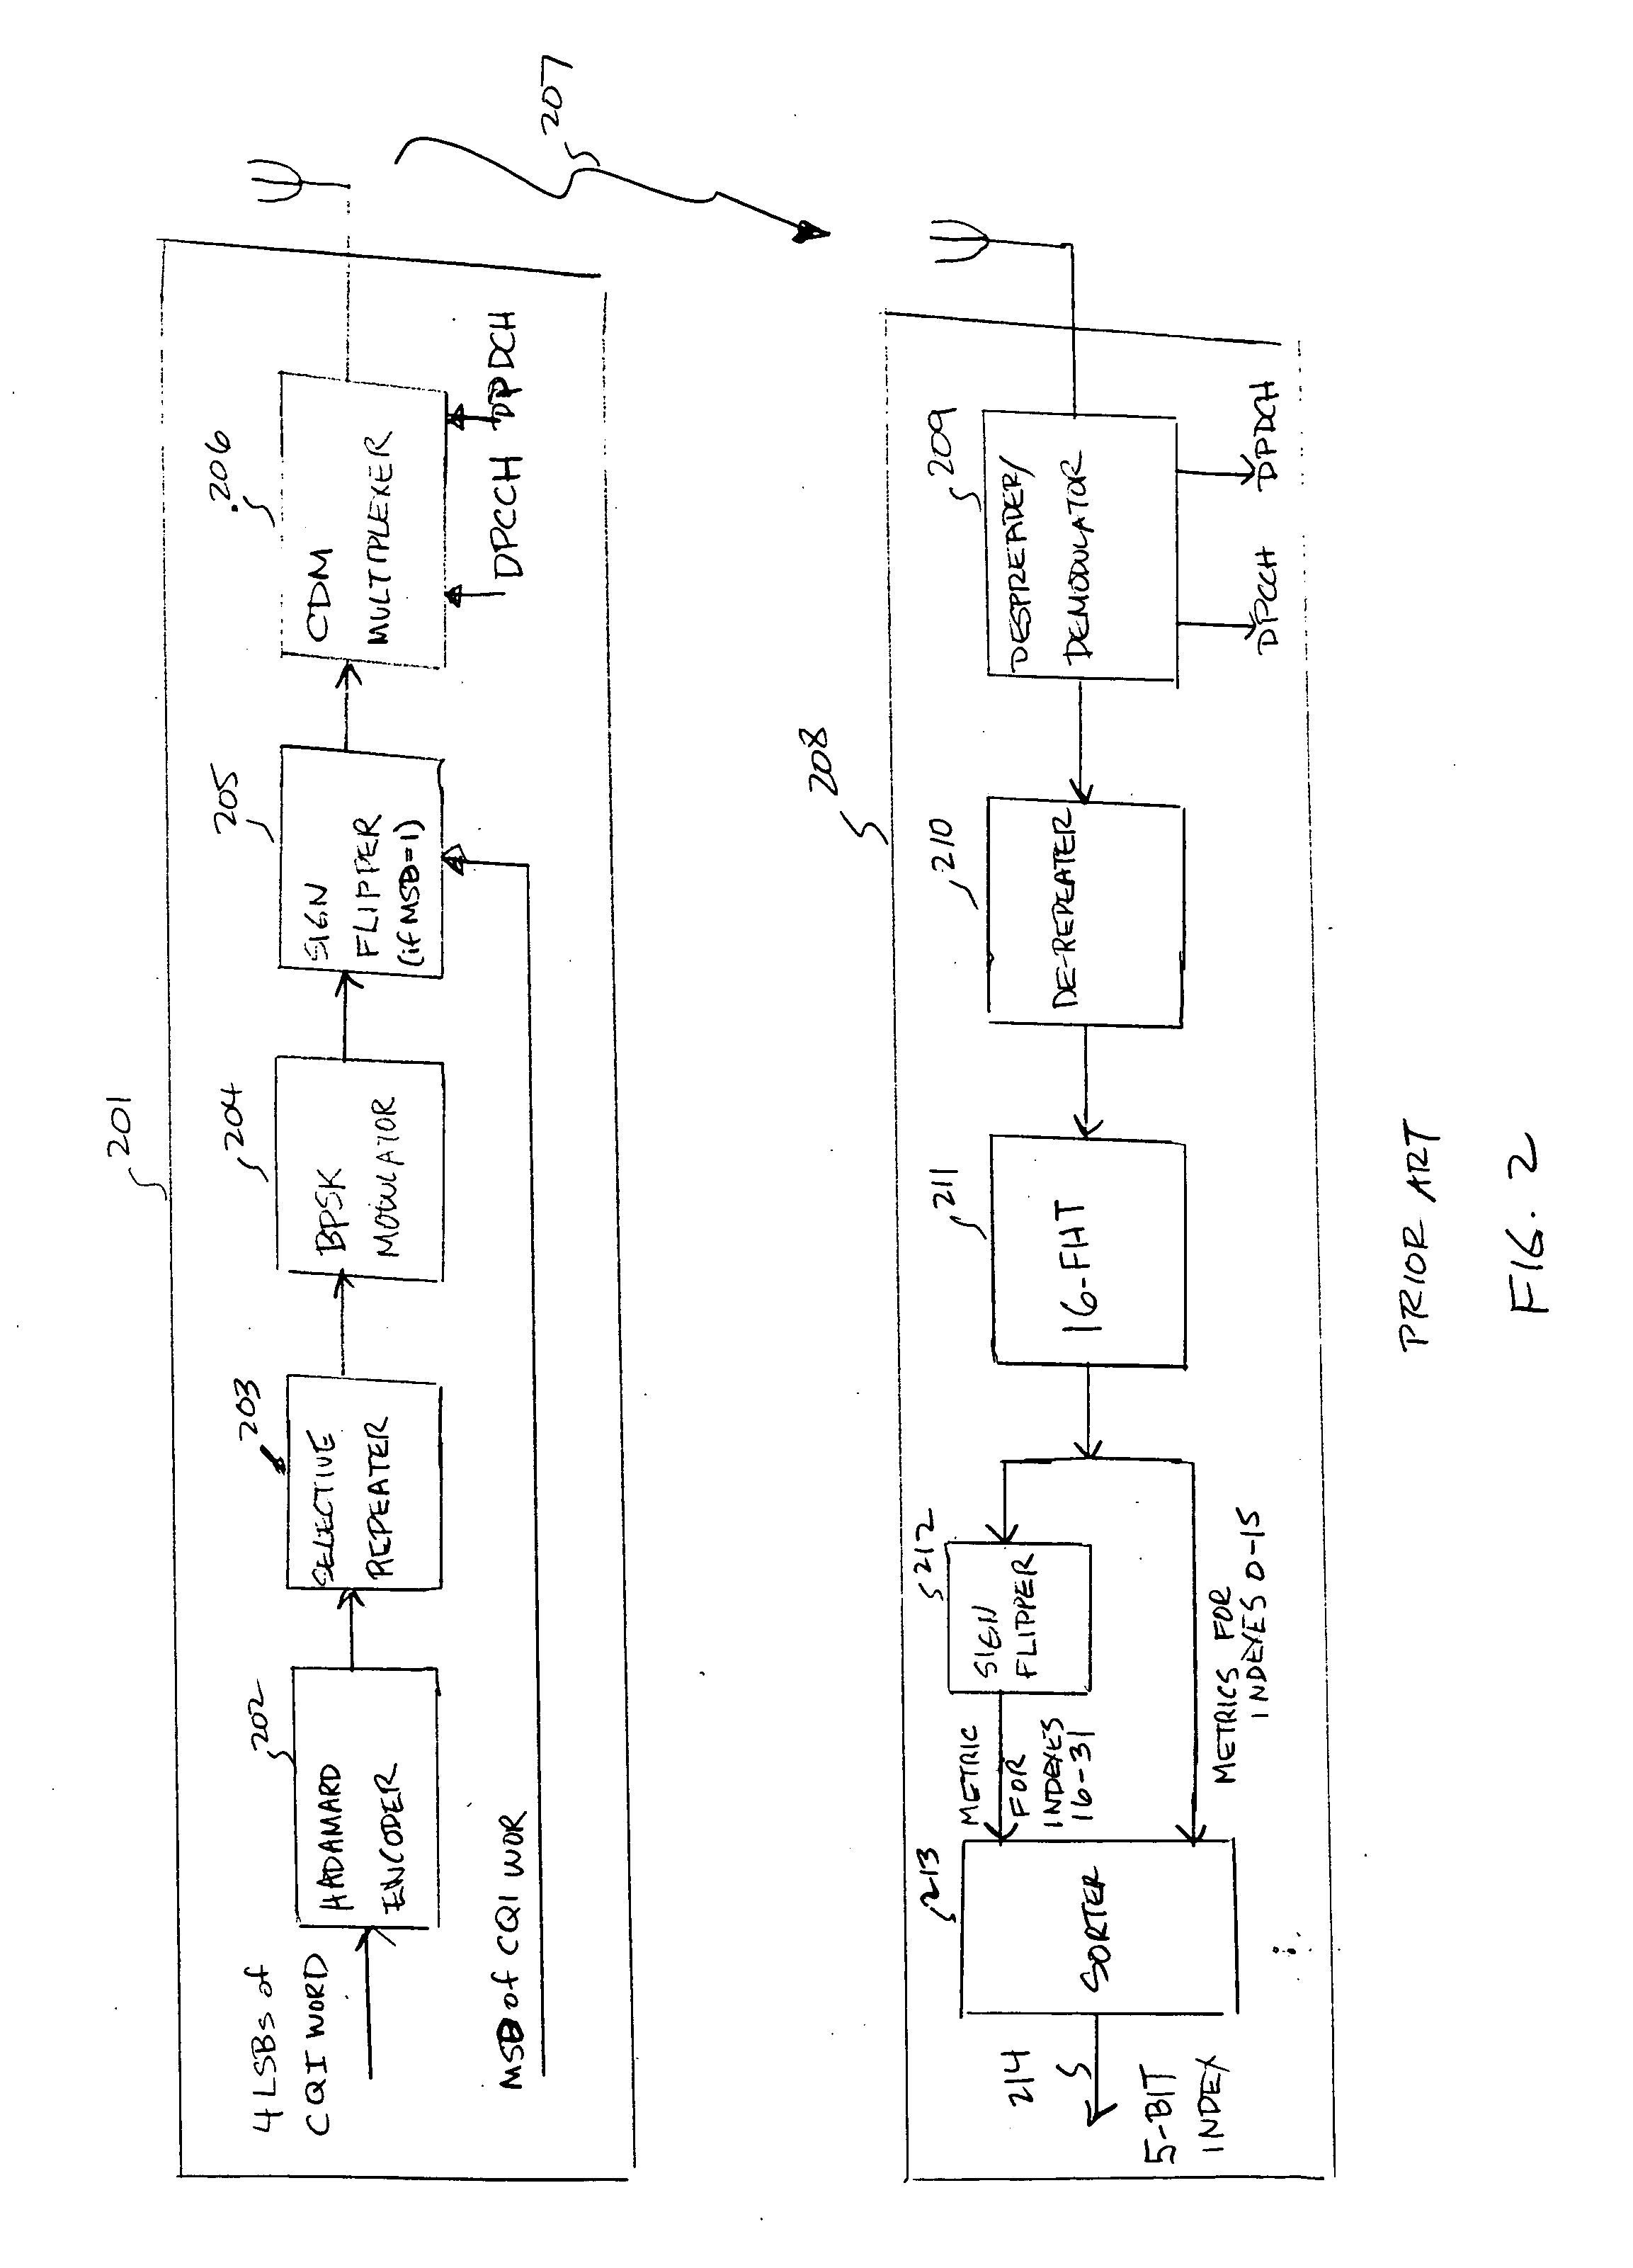 Method and apparatus for enhancing performance of channel quality indicator (CQI) channel in wireless communications system